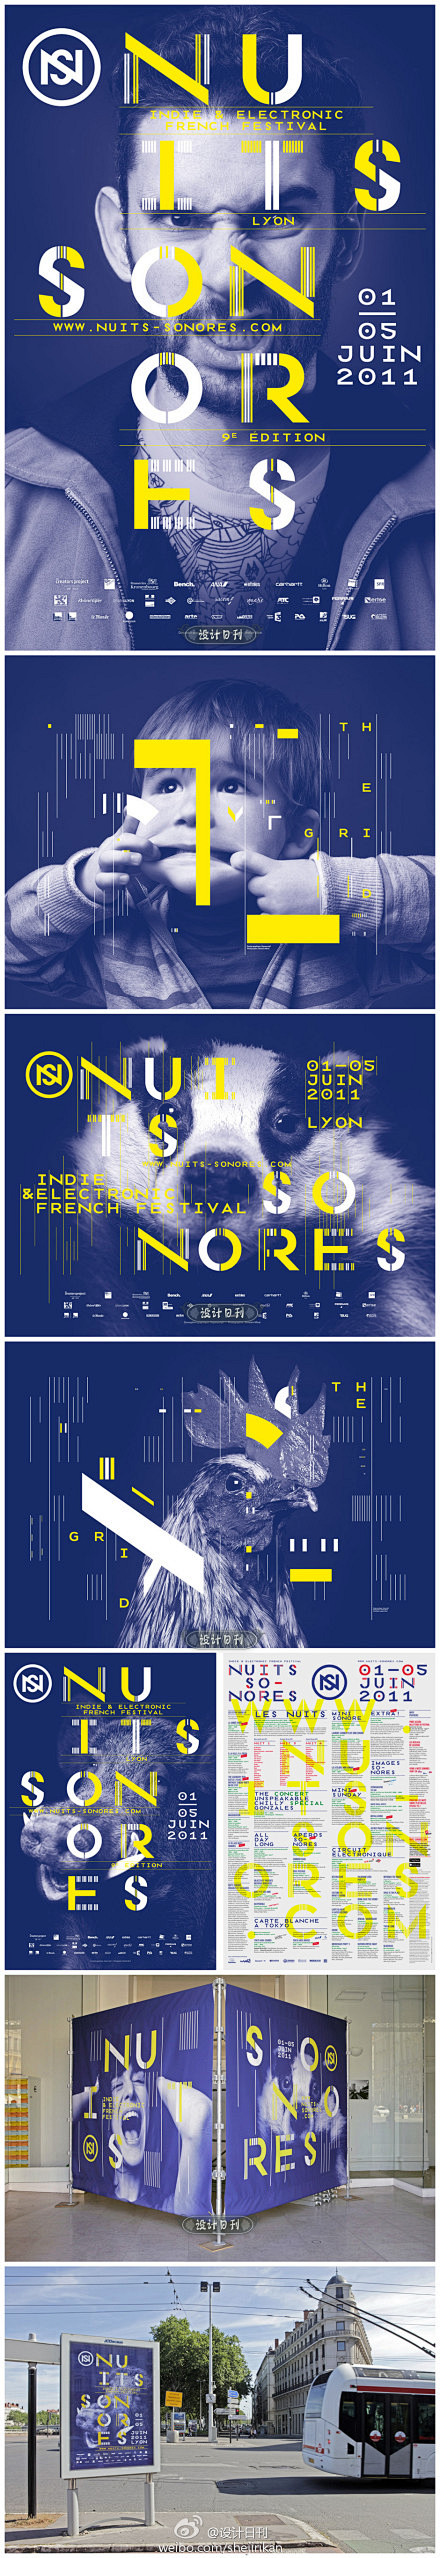 【Nuits Sonores 2011视...